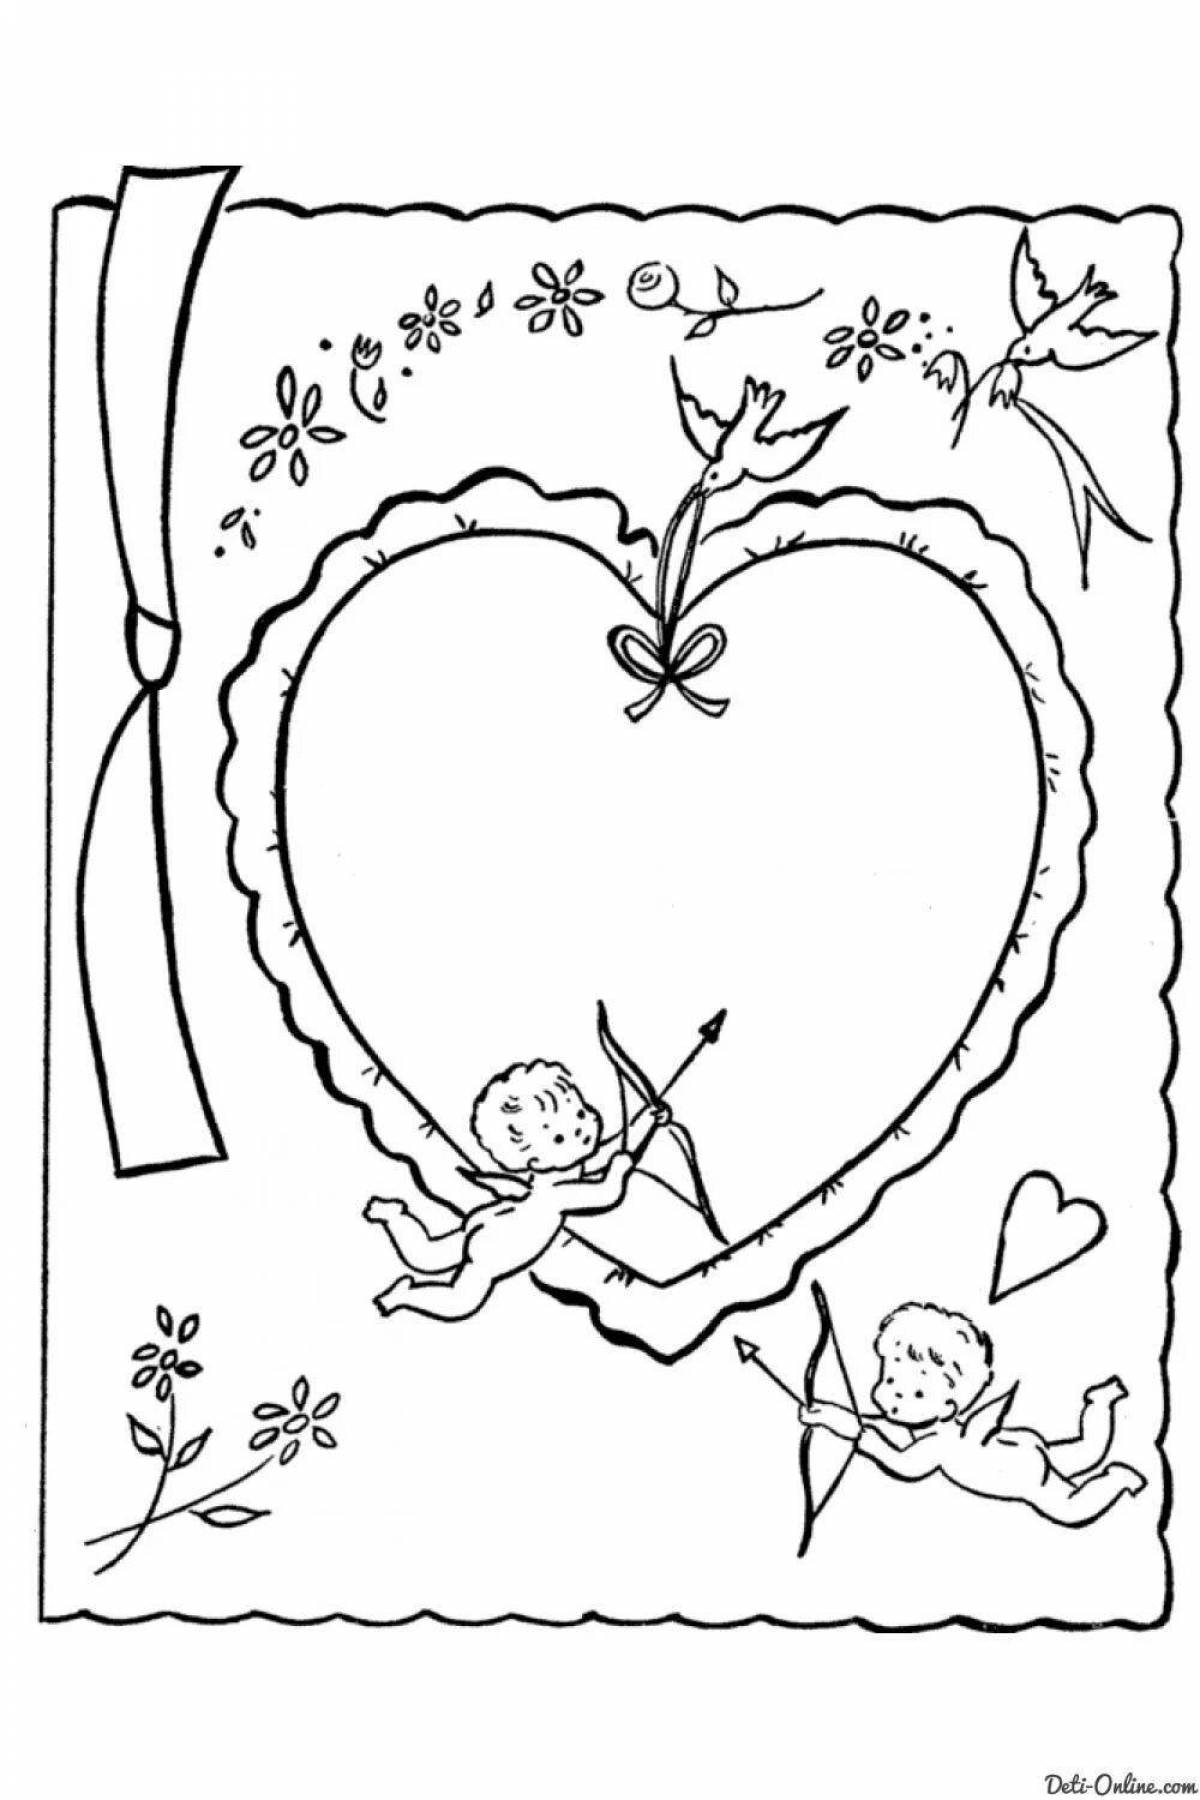 Adorable coloring book February 14th